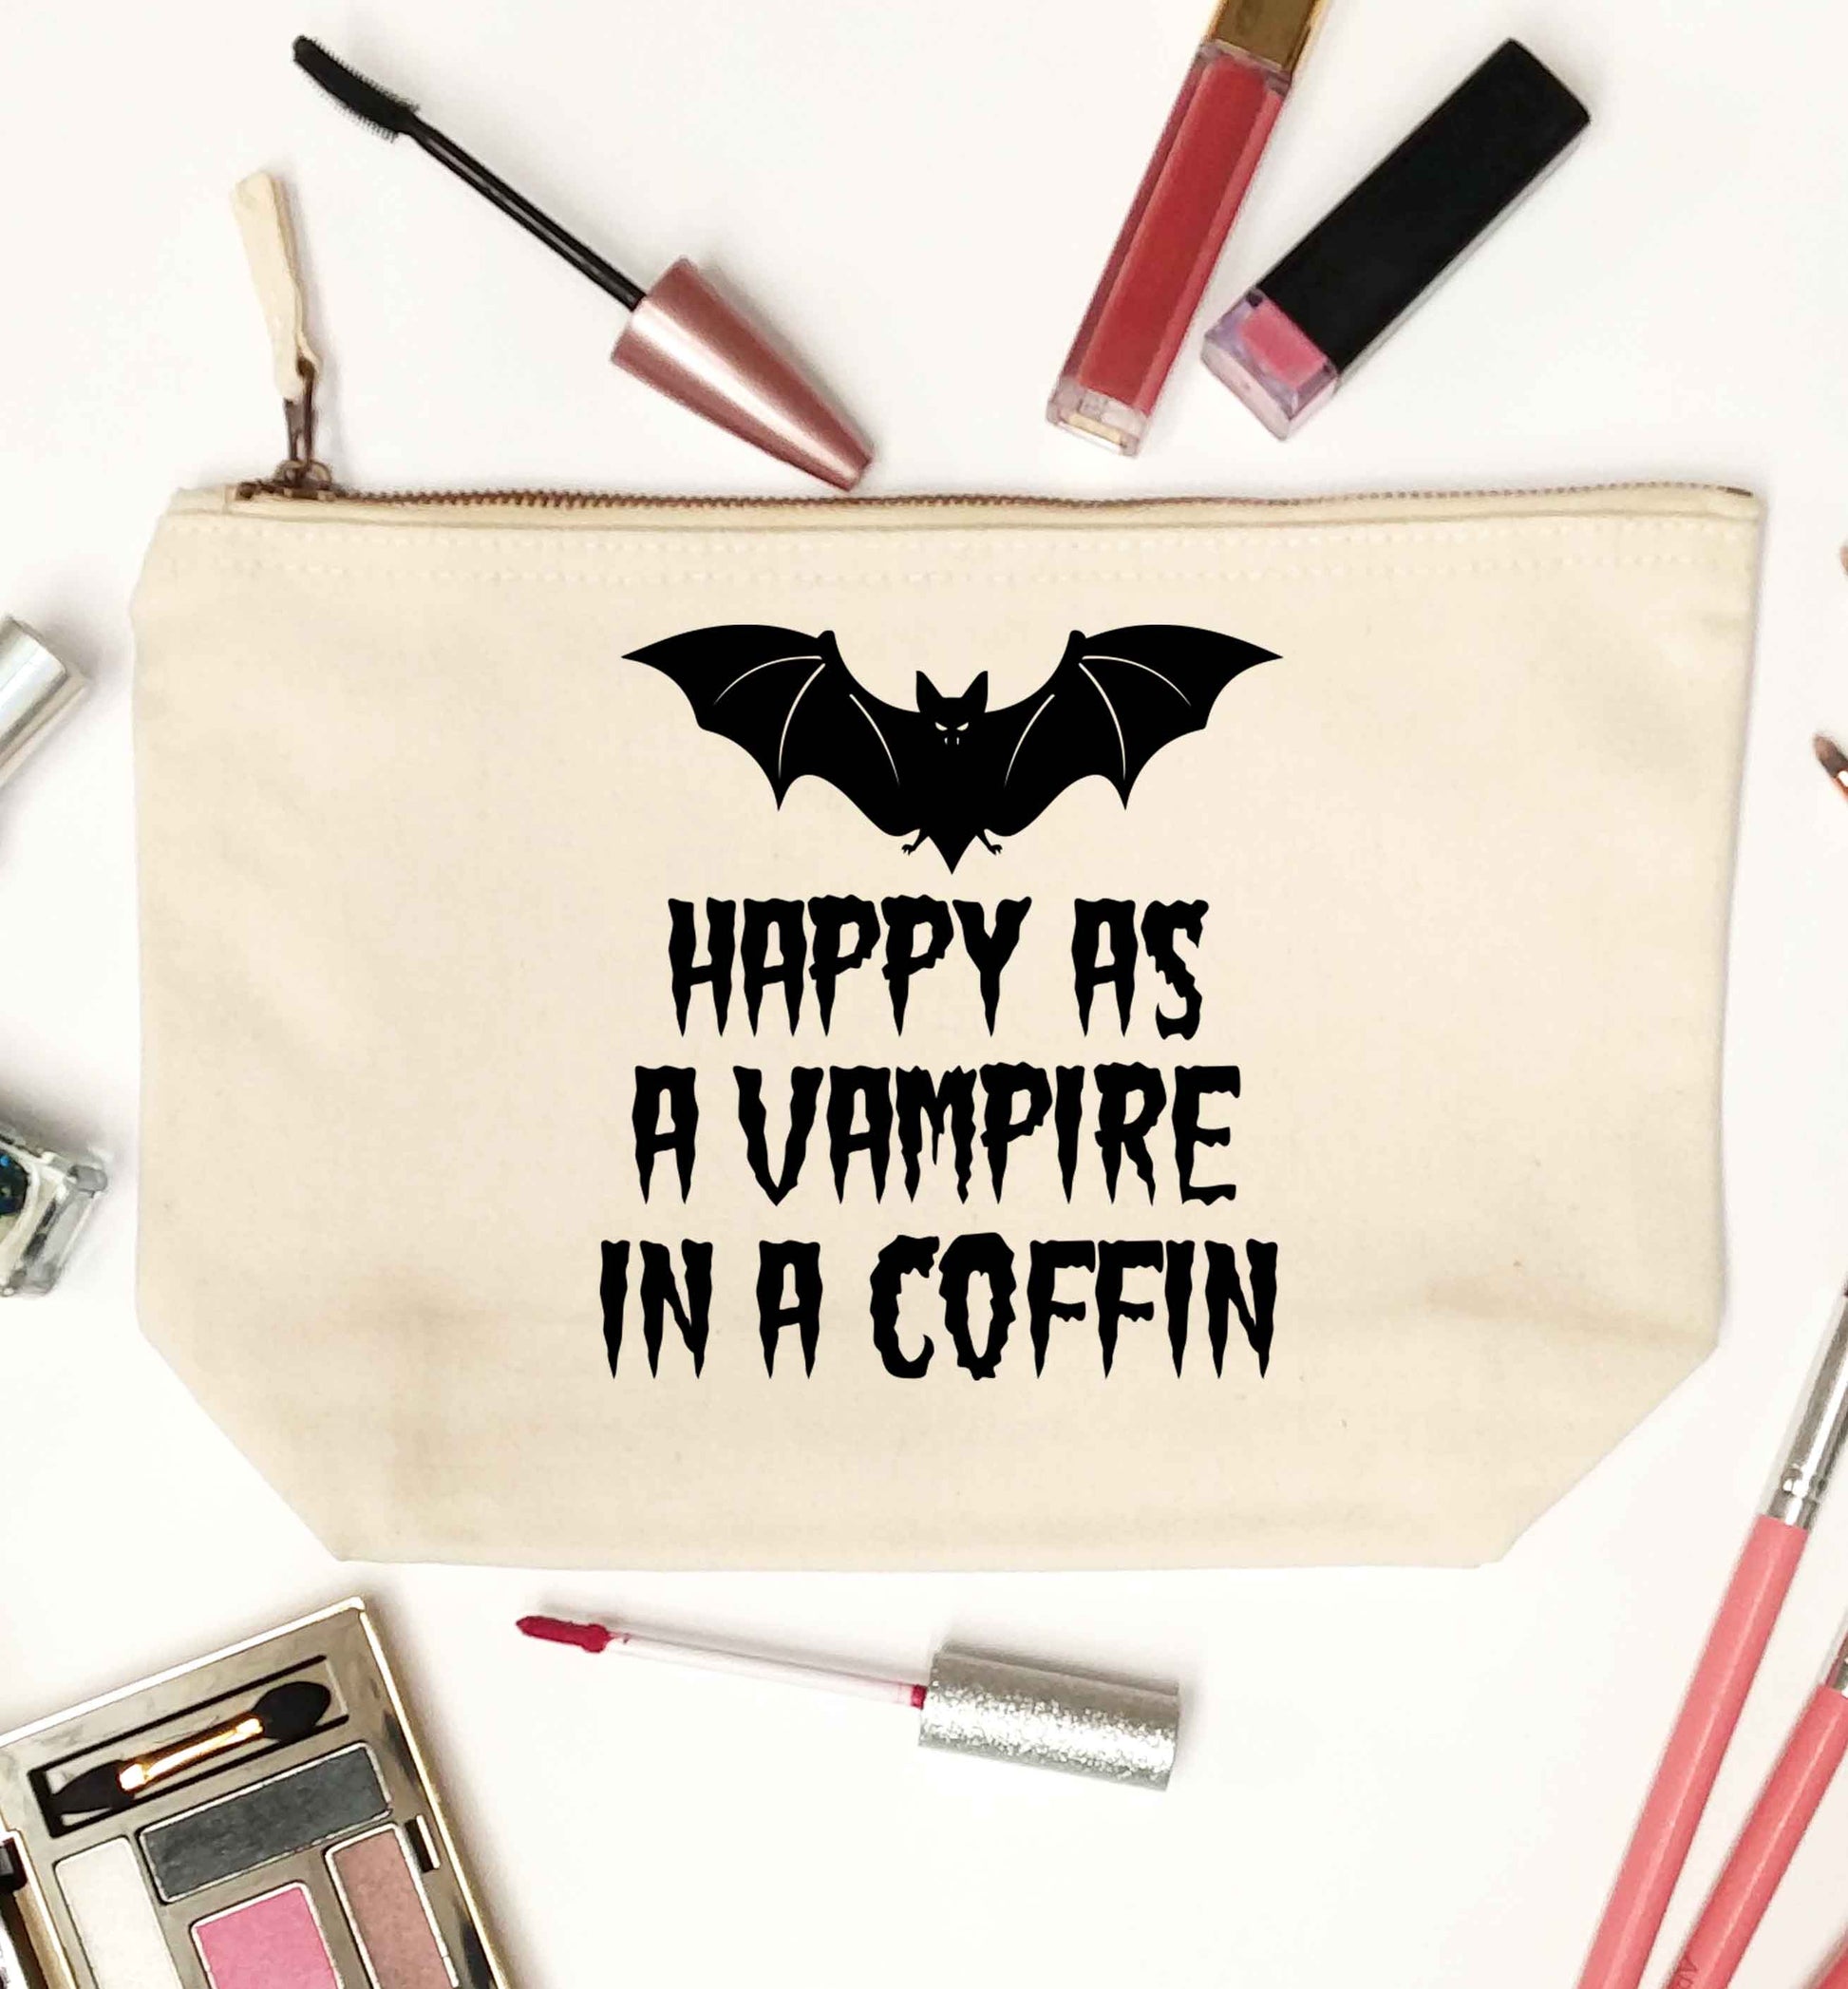 Happy as a vampire in a coffin natural makeup bag